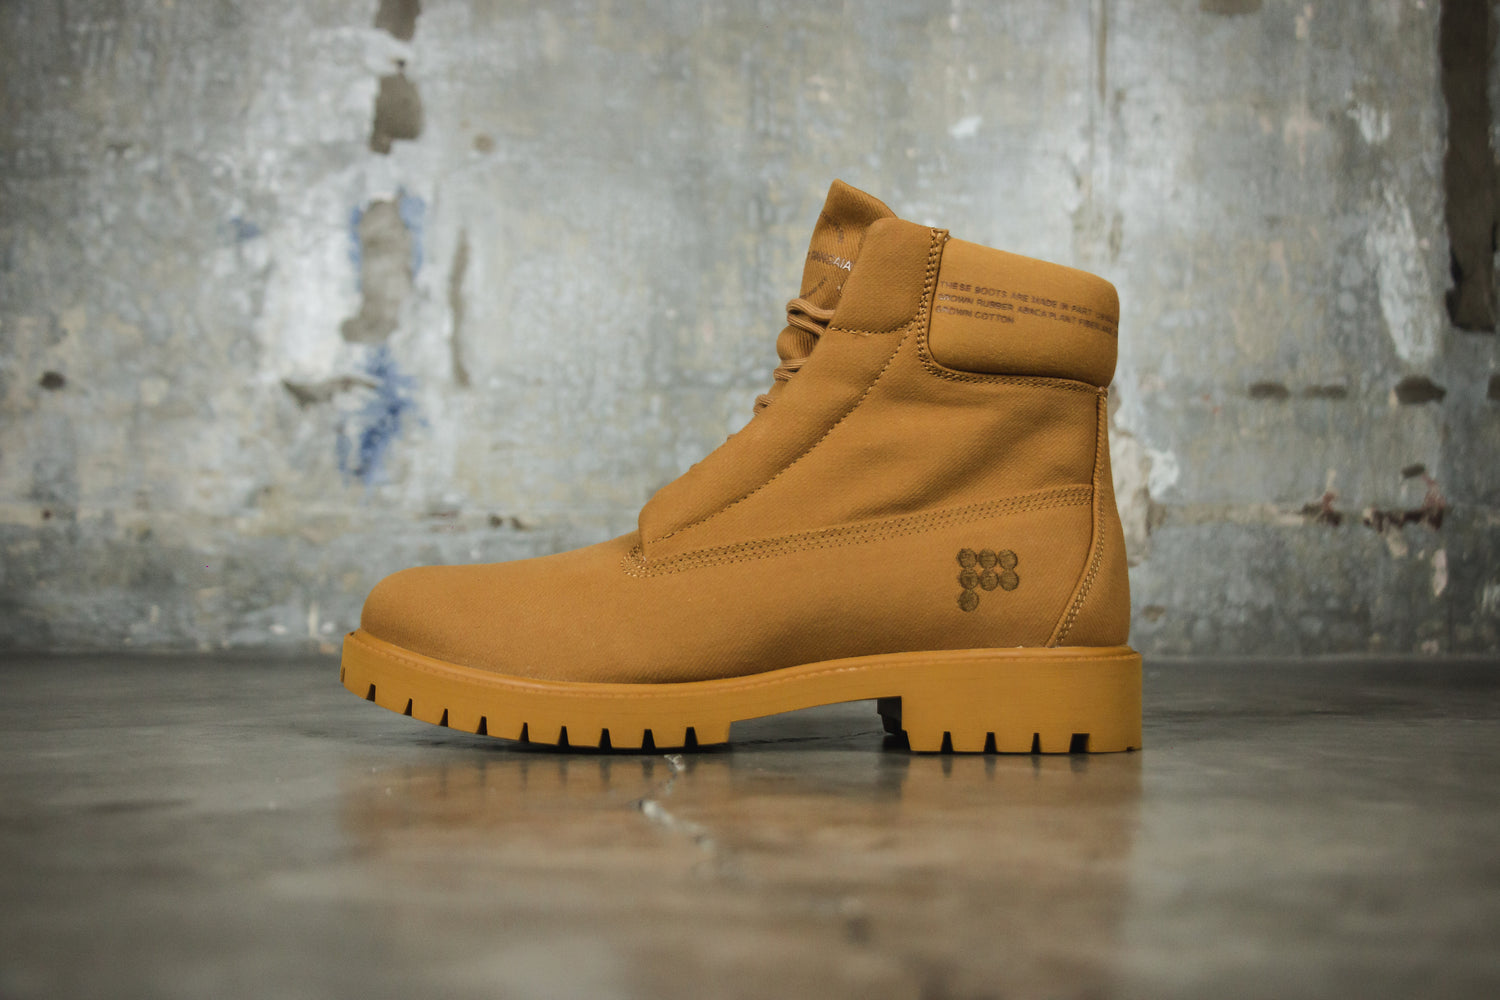 Pangaia x Timberland Boots 6IN (6855448002626)